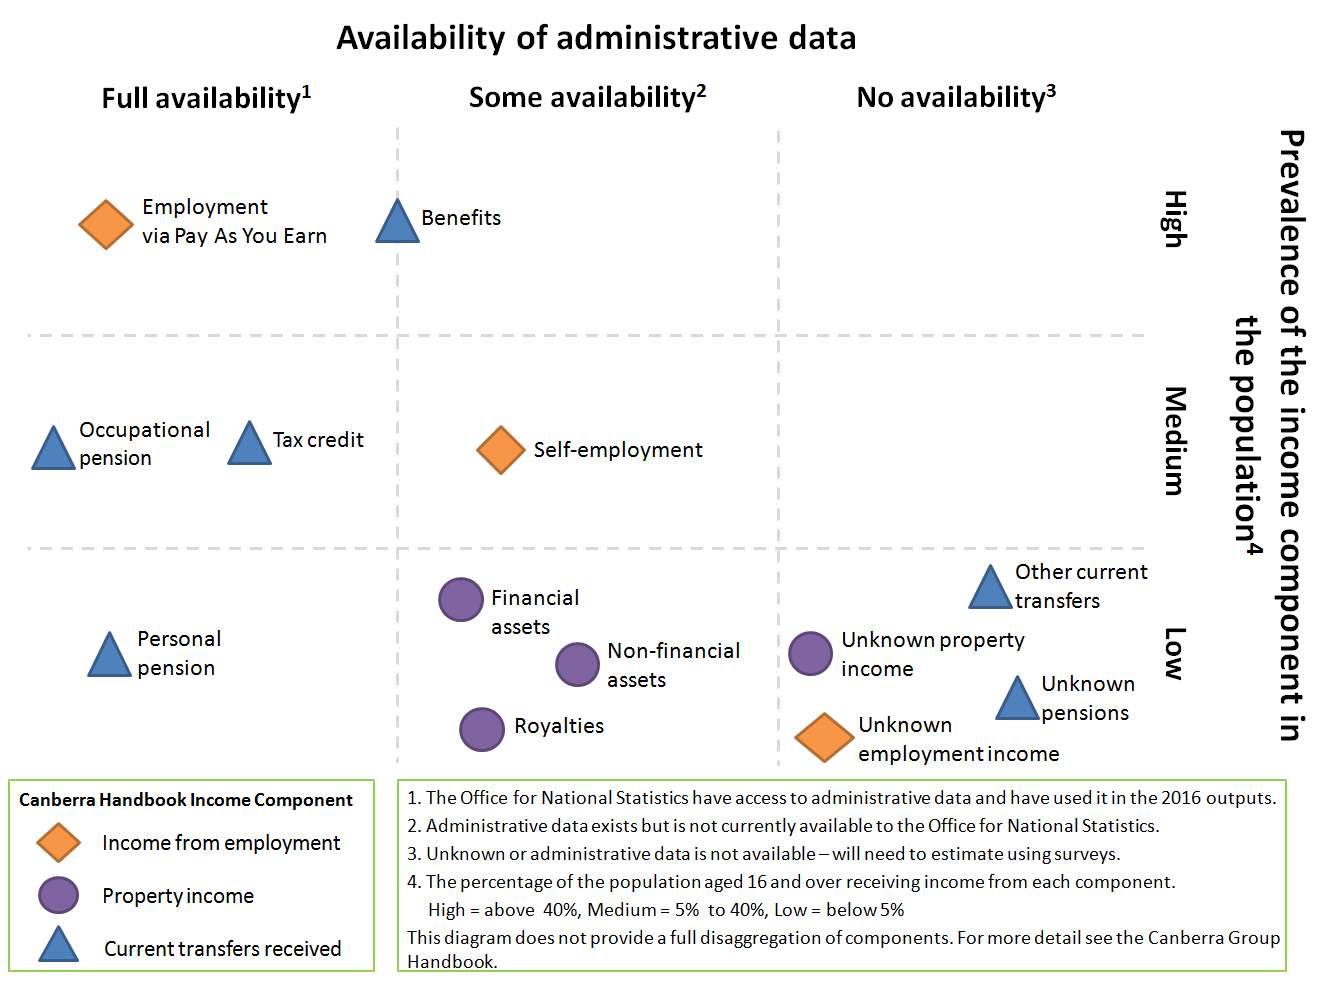 The availability of administrative data on the different income components varies greatly.